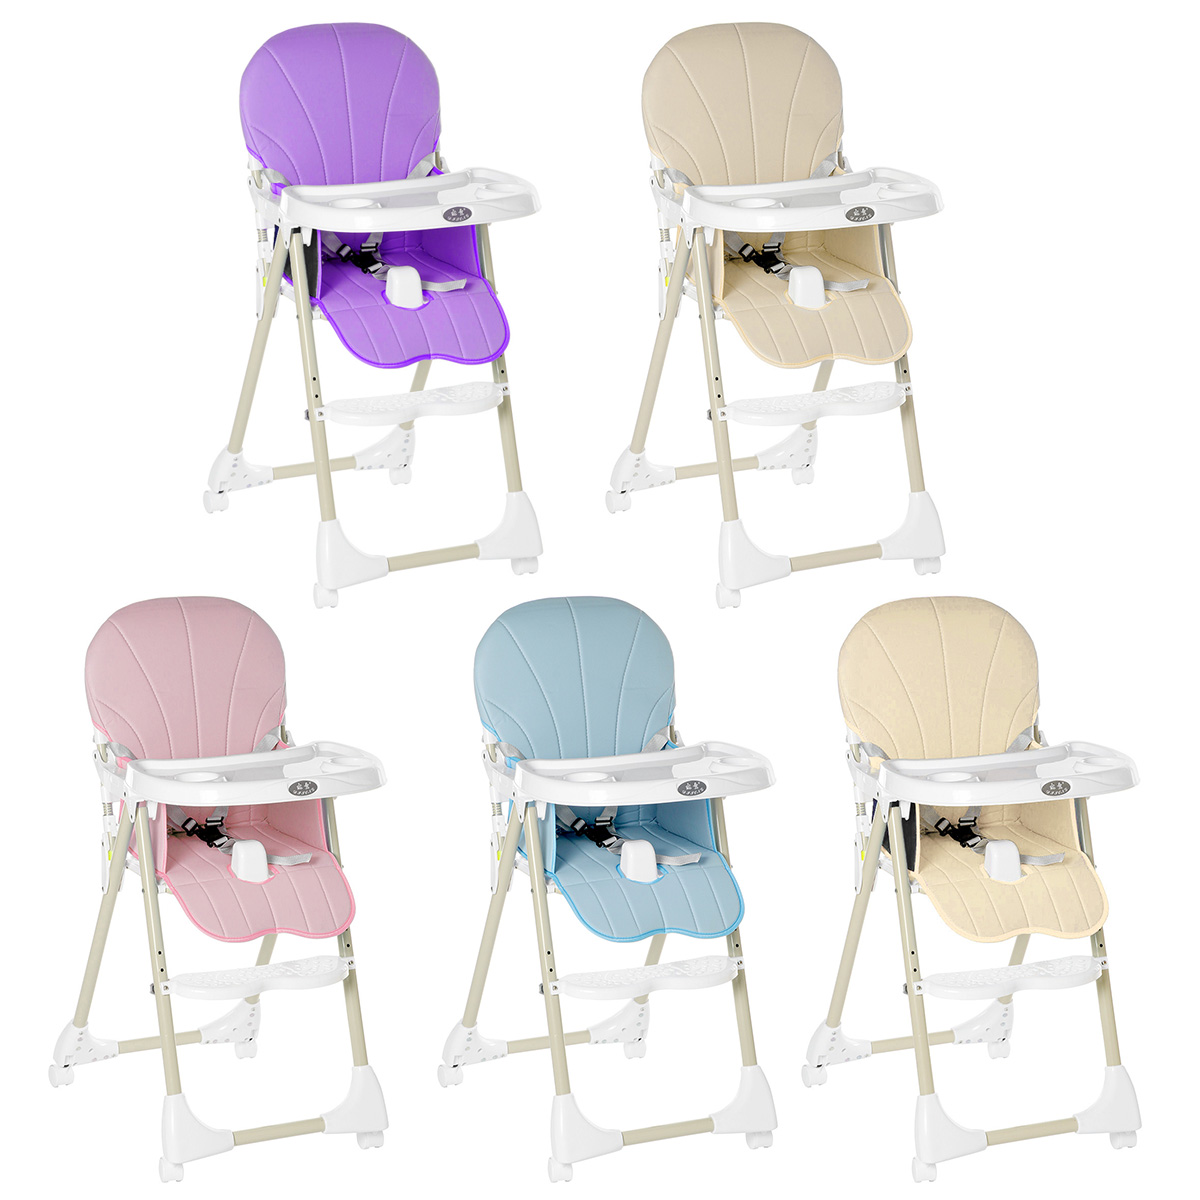 Ditong-Portable-Folding-Baby-High-Chair-Adjustable-Plate-Lockable-Wheels-PU-Seat-with-Environmental--1748389-9